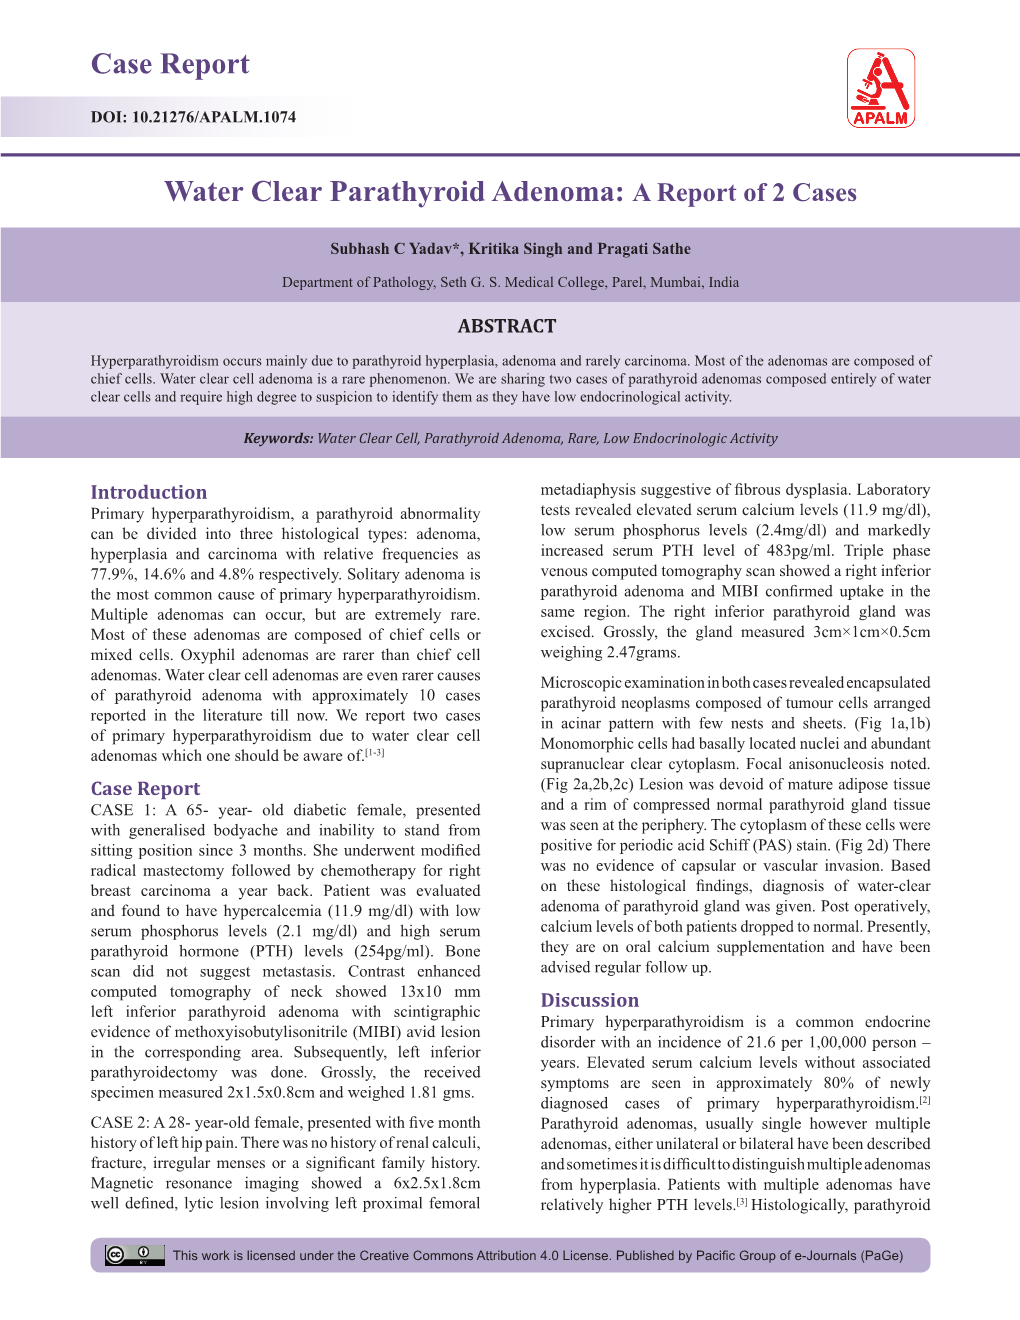 Case Report Water Clear Parathyroid Adenoma